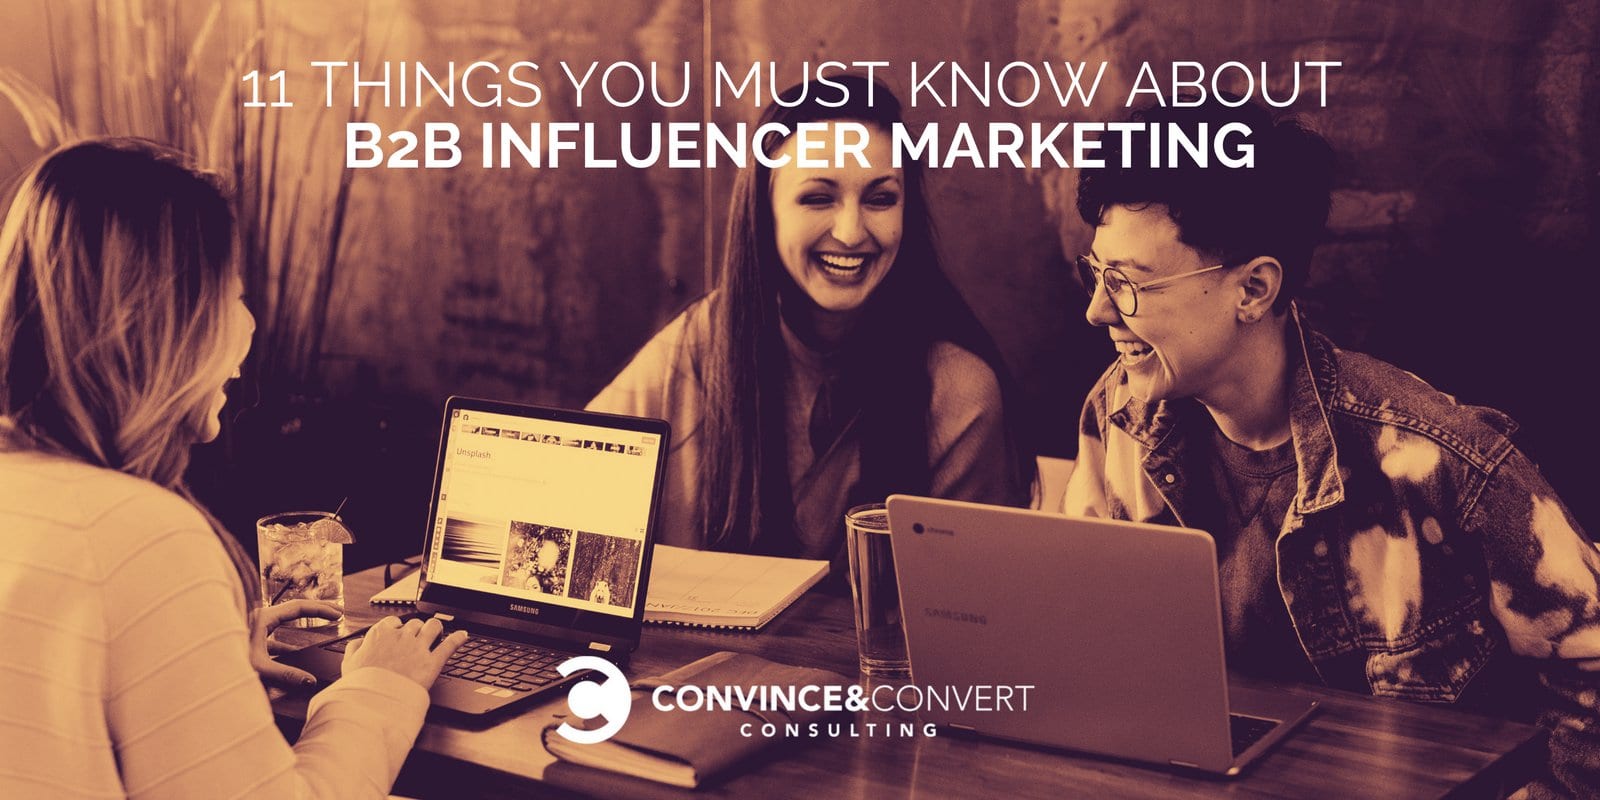 11-Things-You-Must-Know-About-B2B-Influencer-Marketing.jpg